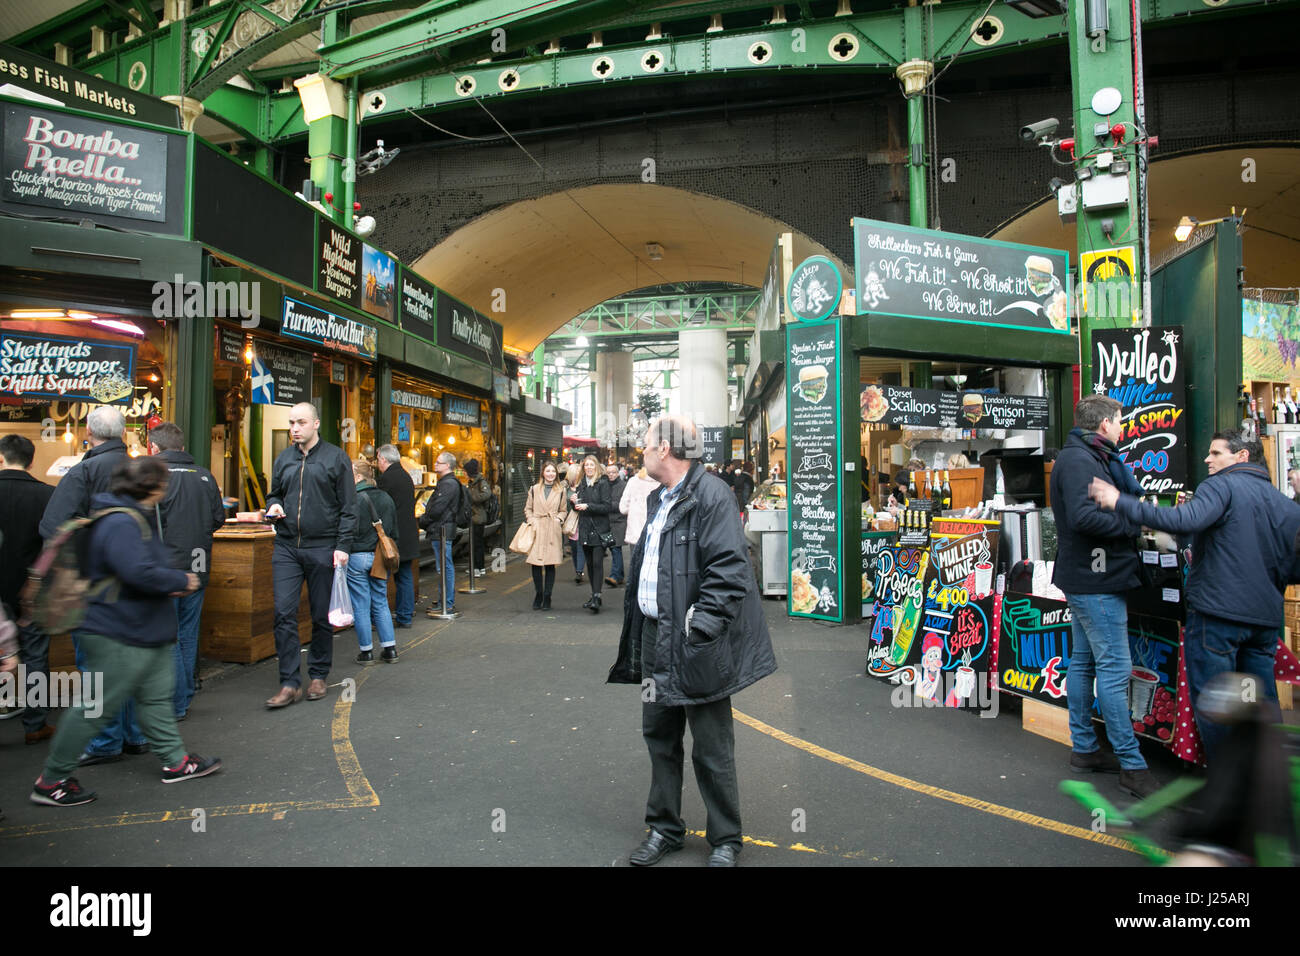 Colourful food market in london Stock Photo